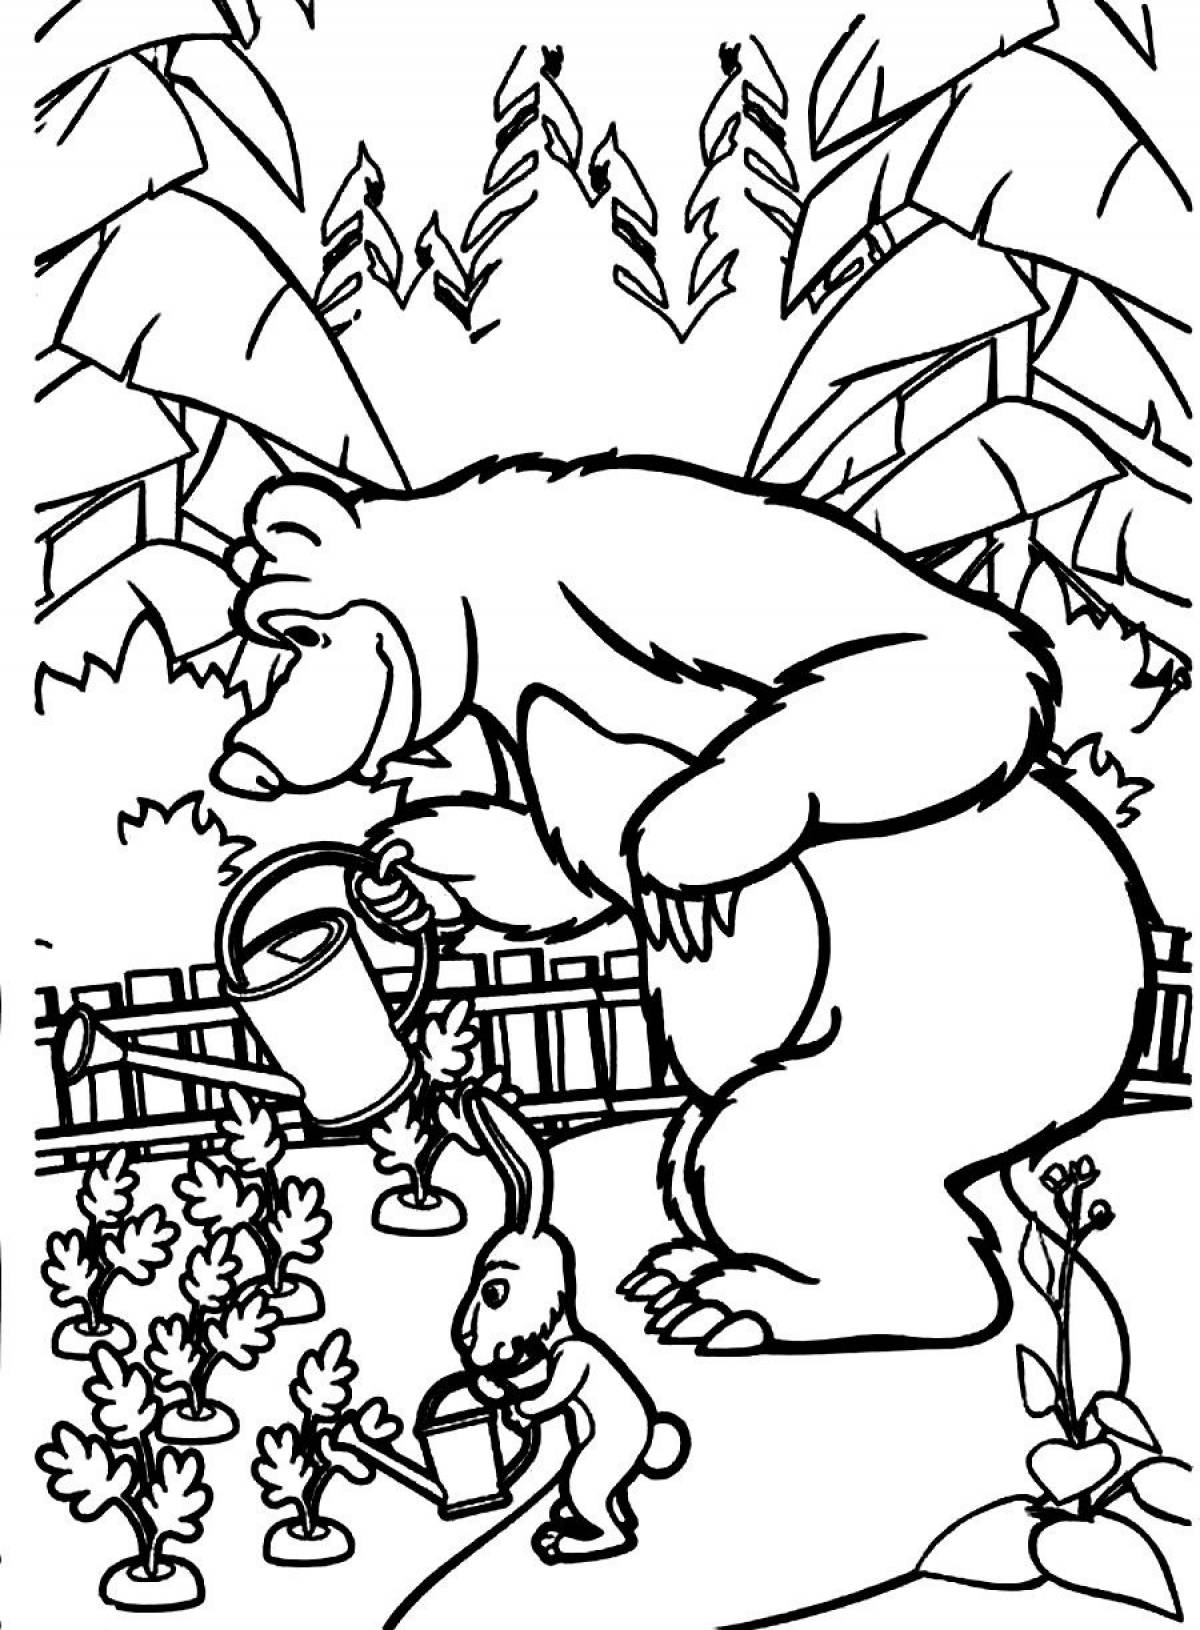 Bear and watering can coloring page